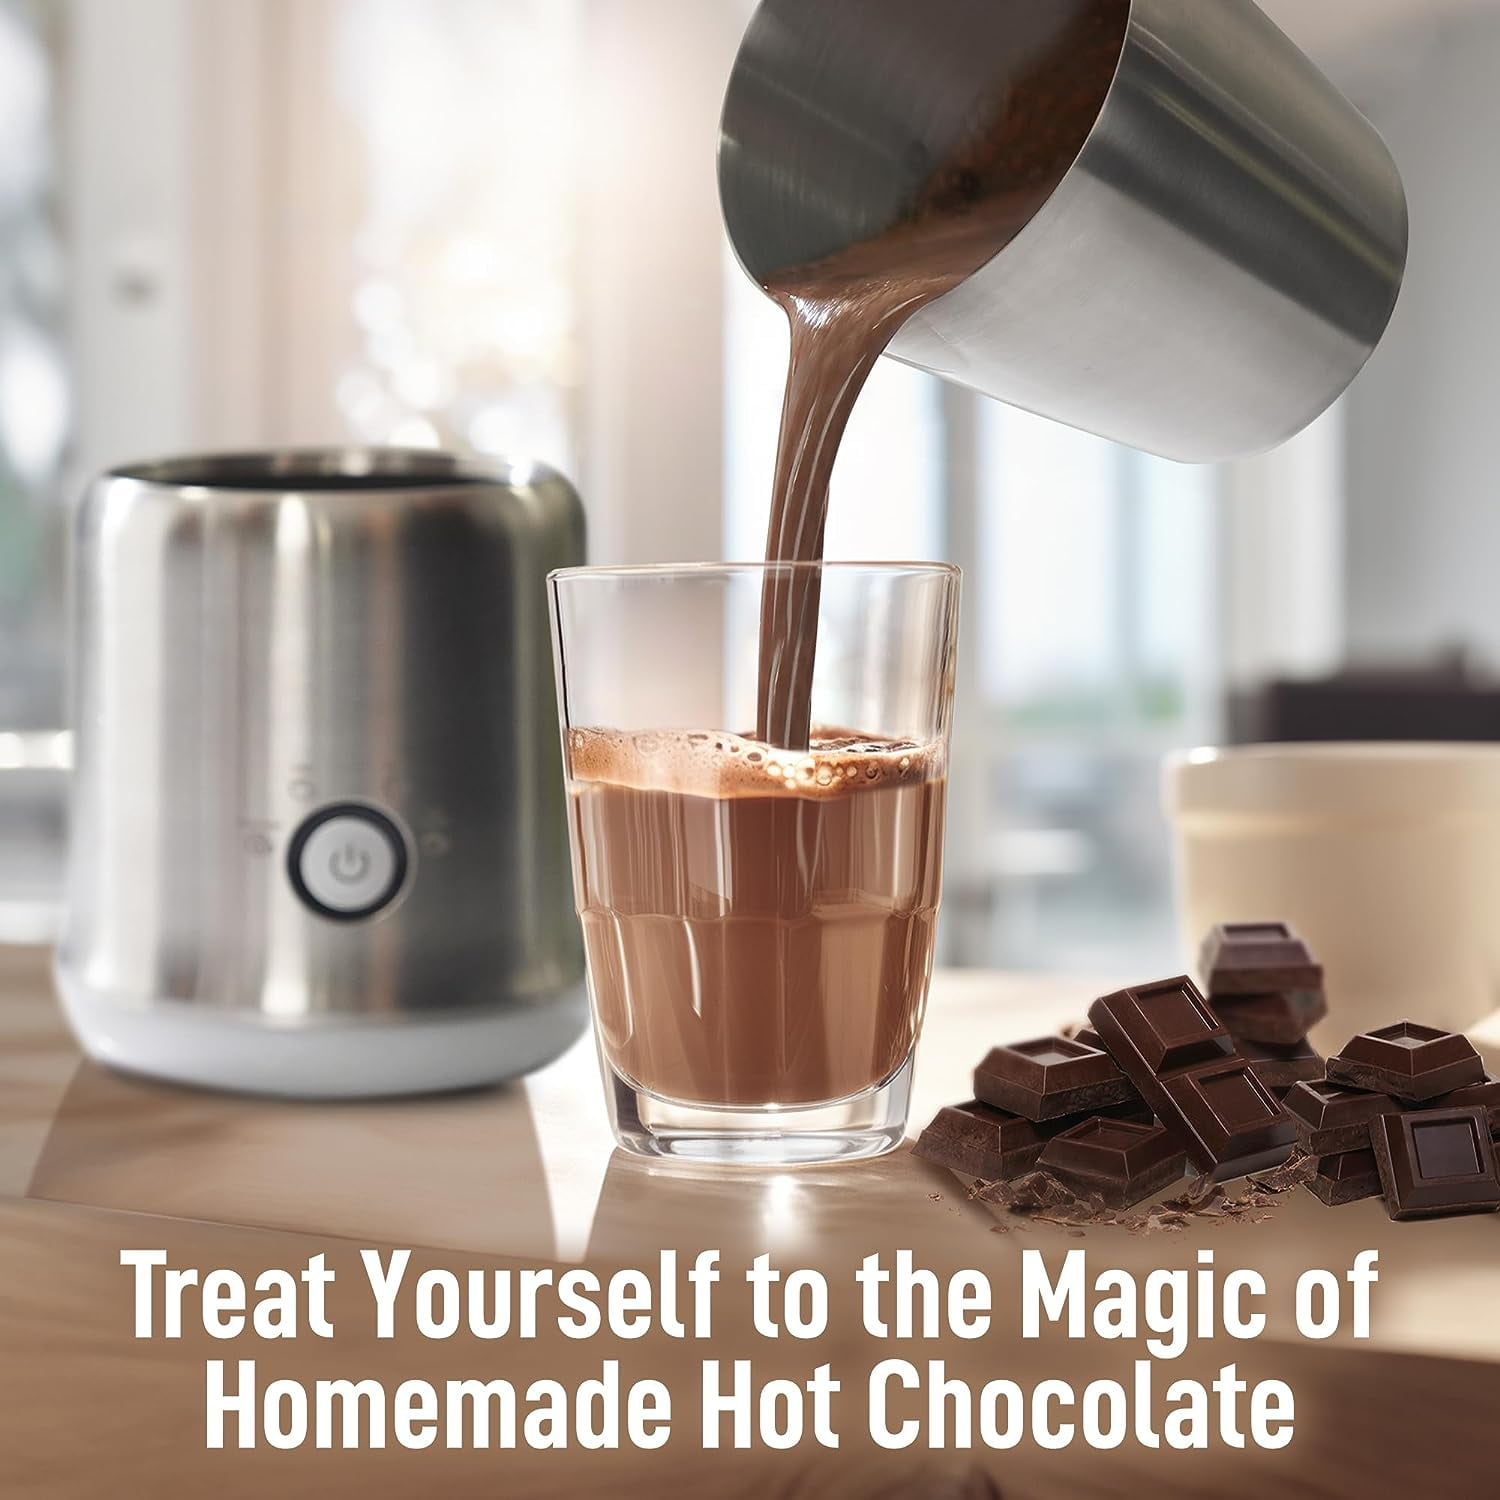 Zulay Electric Hot Chocolate Maker Machine - Powerful, Stainless Steel Hot  Chocolate Machine & Hot Cocoa Maker - 4-in-1 Detachable Milk Frother Heater